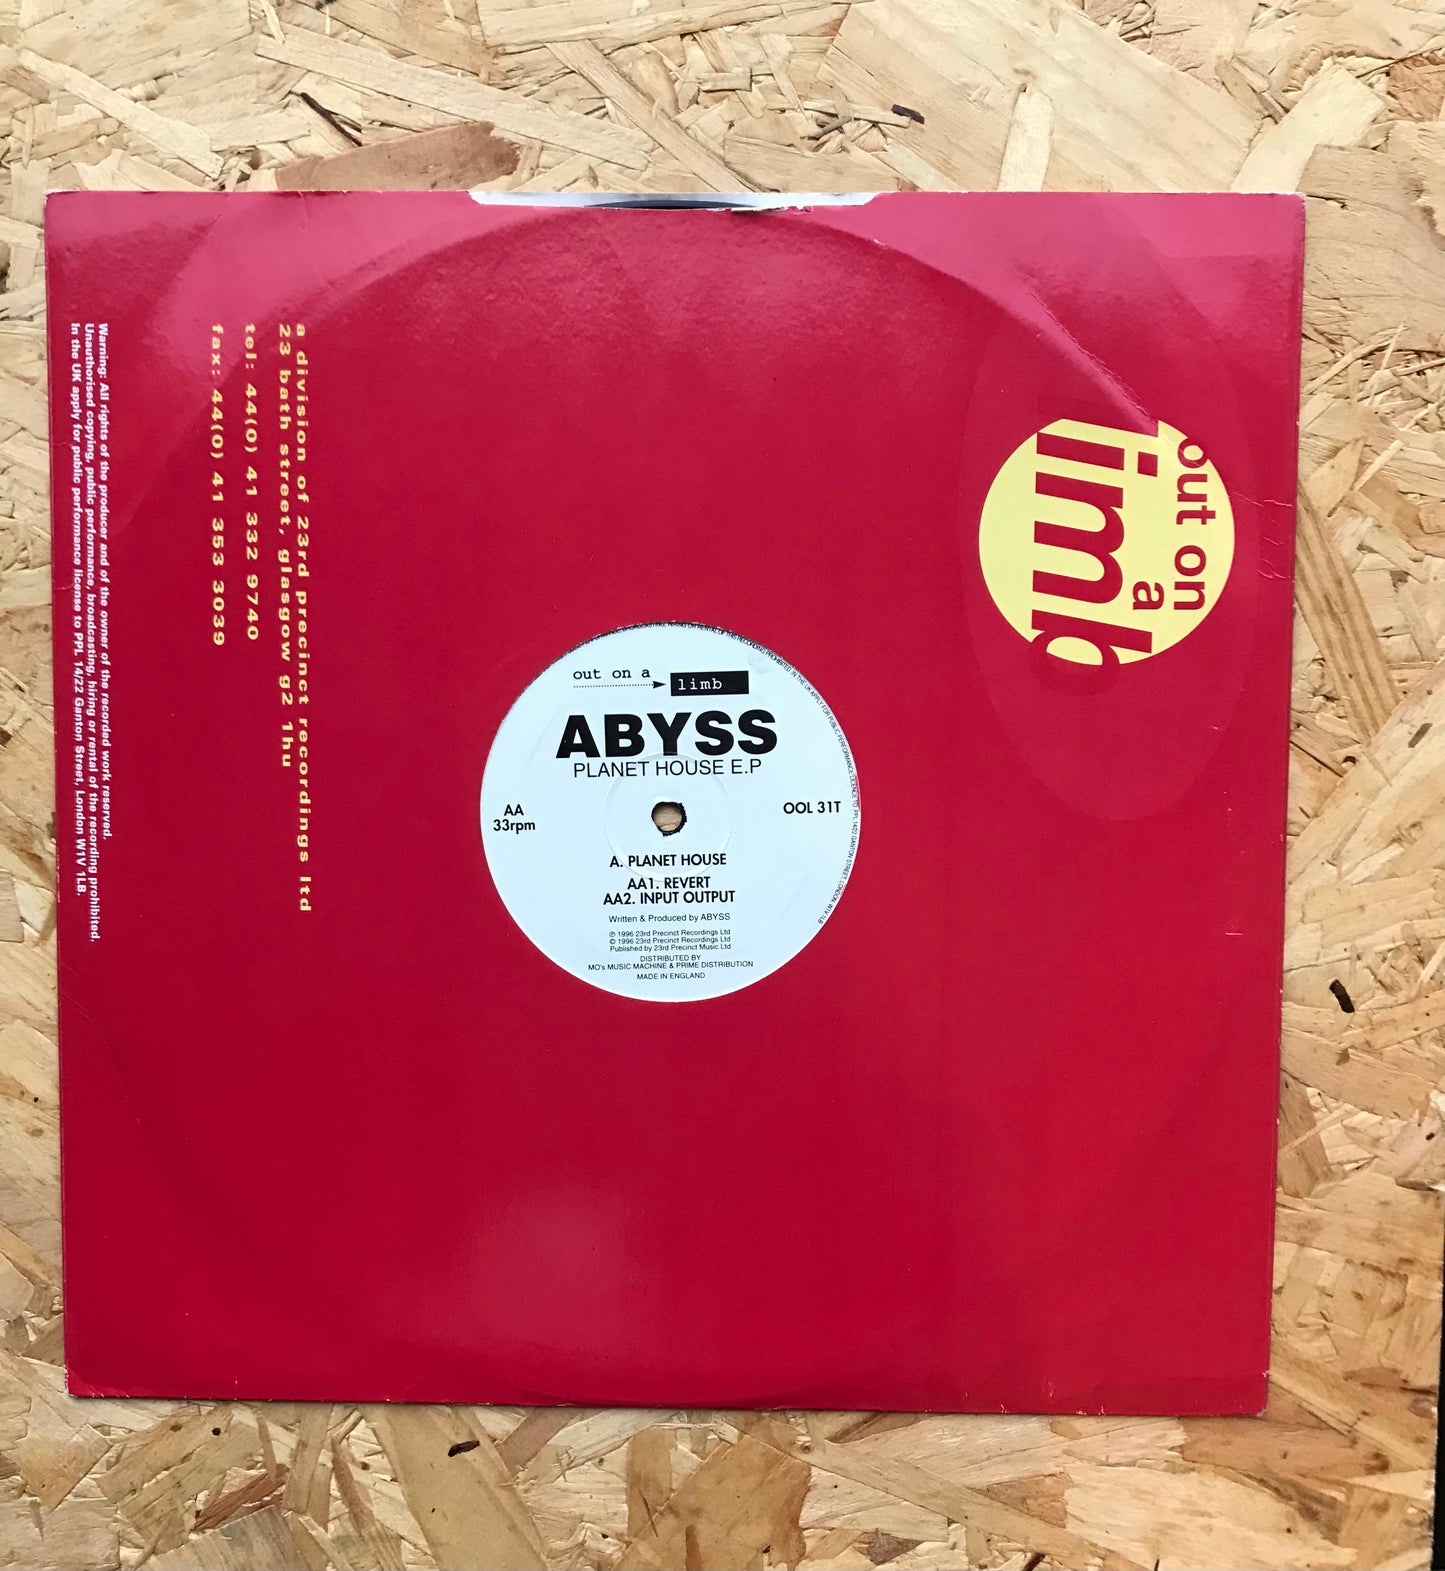 Abyss – Planet House E.P